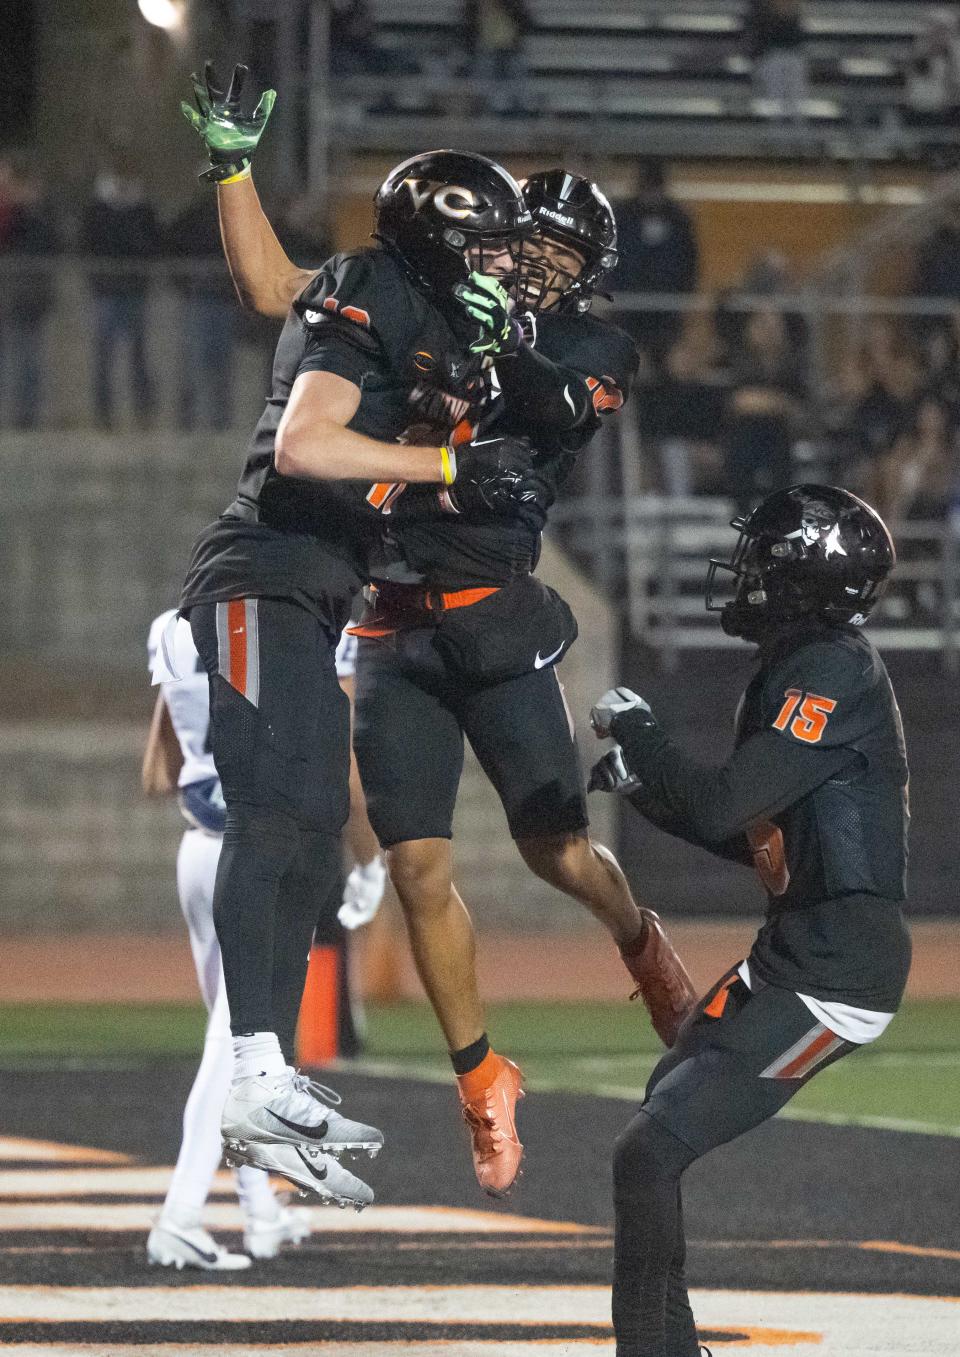 Ventura College receiver Tyler Woodworth celebrates his game-winning TD catch with teammate Eli Aragon after the Pirates took the lead over visiting El Camino College with 1:14 to play Saturday night at the VC Sportsplex.